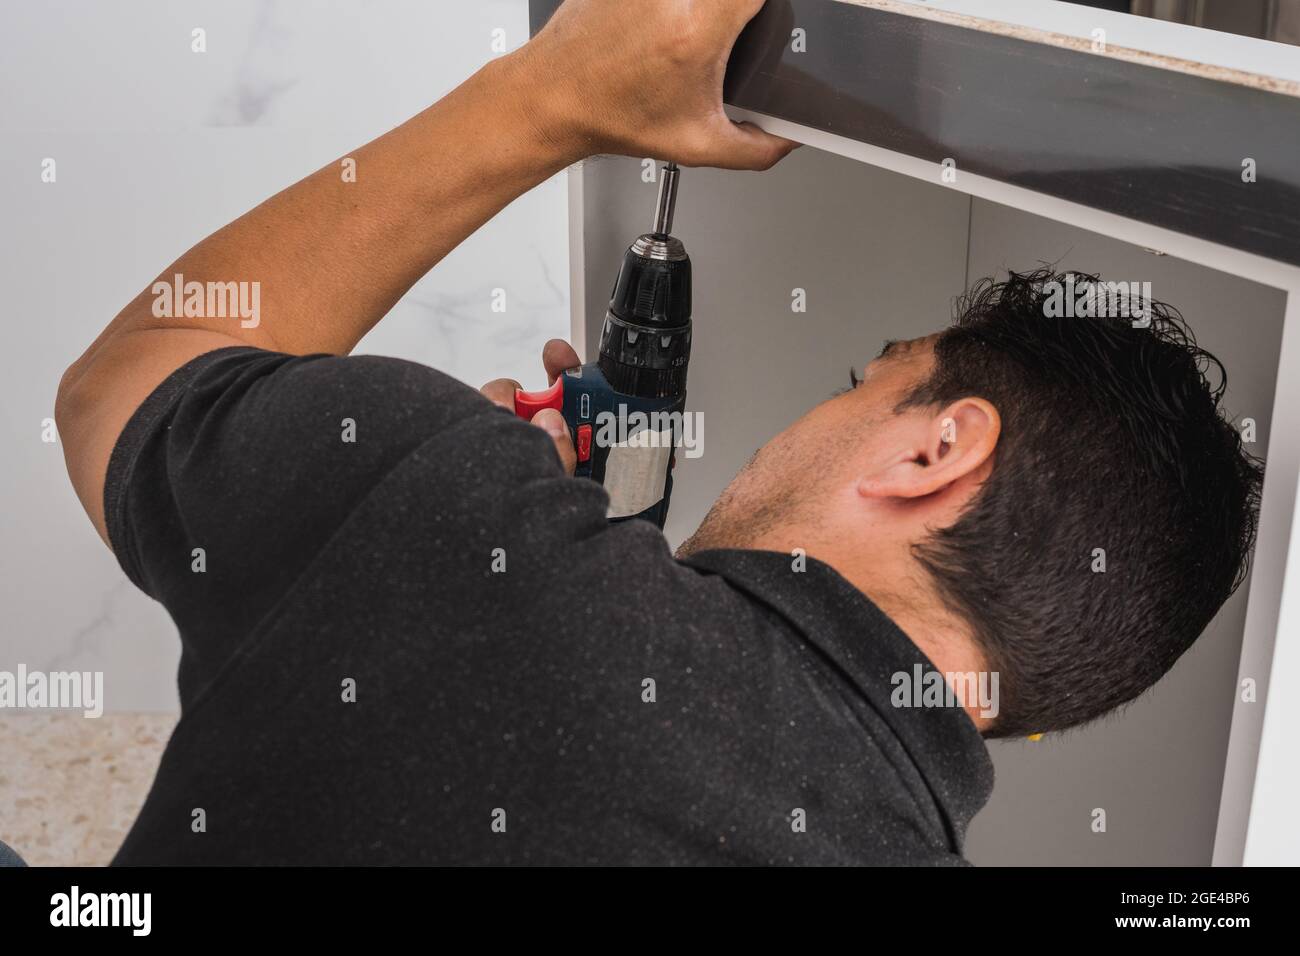 Man bent over while using a drill to assemble a kitchen unit Stock Photo